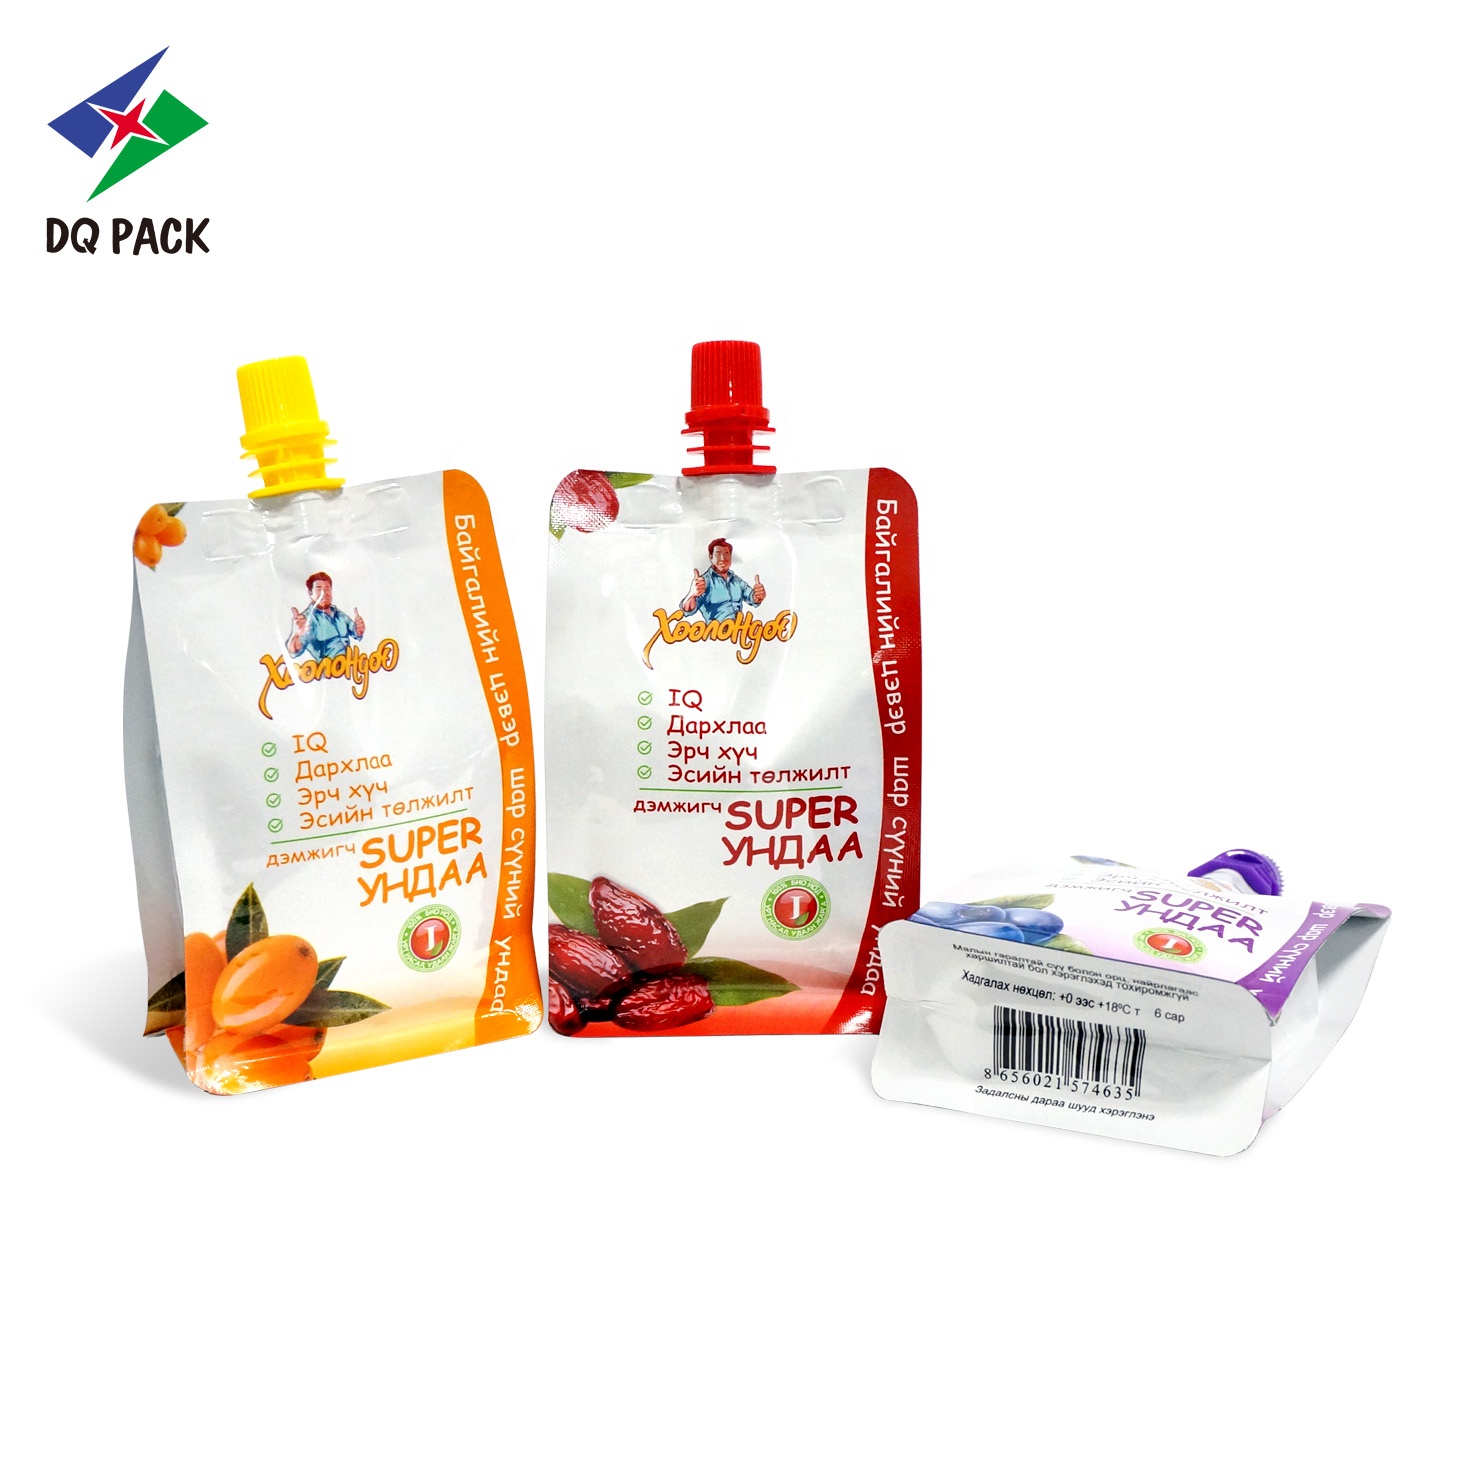 DQ PACK custom printed eco friendly aluminium reusable spout pouch bag for fruit juice drink packaging